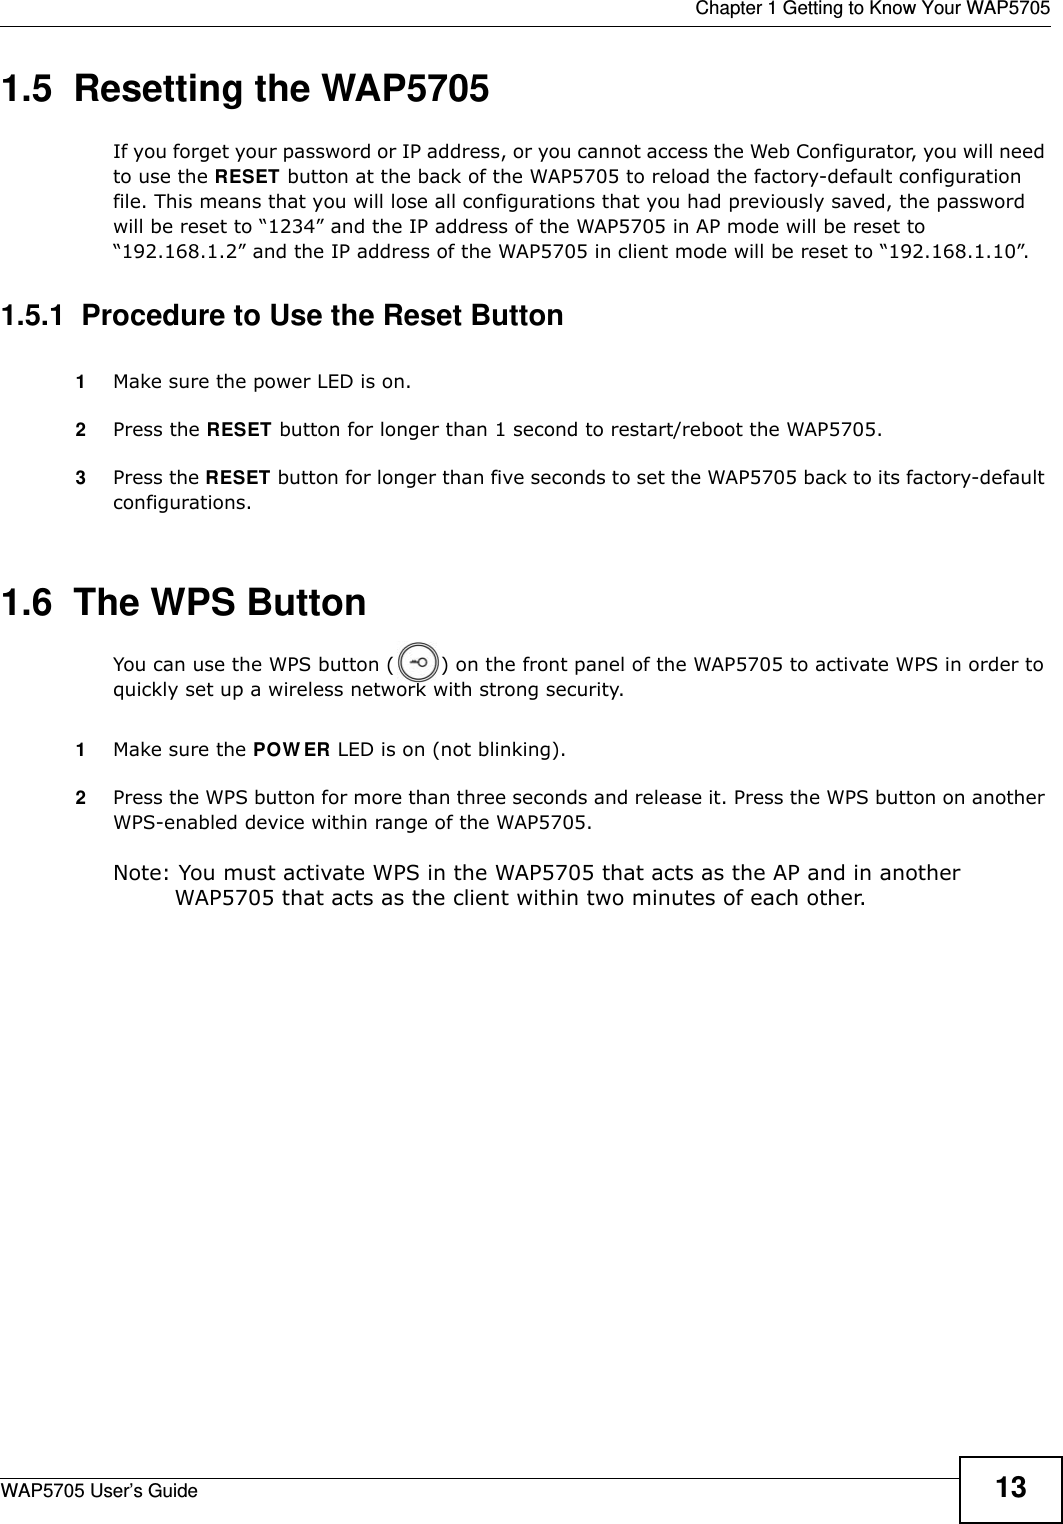  Chapter 1 Getting to Know Your WAP5705WAP5705 User’s Guide 131.5  Resetting the WAP5705If you forget your password or IP address, or you cannot access the Web Configurator, you will need to use the RESET button at the back of the WAP5705 to reload the factory-default configuration file. This means that you will lose all configurations that you had previously saved, the password will be reset to “1234” and the IP address of the WAP5705 in AP mode will be reset to “192.168.1.2” and the IP address of the WAP5705 in client mode will be reset to “192.168.1.10”.1.5.1  Procedure to Use the Reset Button1Make sure the power LED is on.2Press the RESET button for longer than 1 second to restart/reboot the WAP5705.3Press the RESET button for longer than five seconds to set the WAP5705 back to its factory-default configurations.1.6  The WPS ButtonYou can use the WPS button ( ) on the front panel of the WAP5705 to activate WPS in order to quickly set up a wireless network with strong security.1Make sure the POW ER LED is on (not blinking).2Press the WPS button for more than three seconds and release it. Press the WPS button on another WPS-enabled device within range of the WAP5705. Note: You must activate WPS in the WAP5705 that acts as the AP and in another WAP5705 that acts as the client within two minutes of each other. 